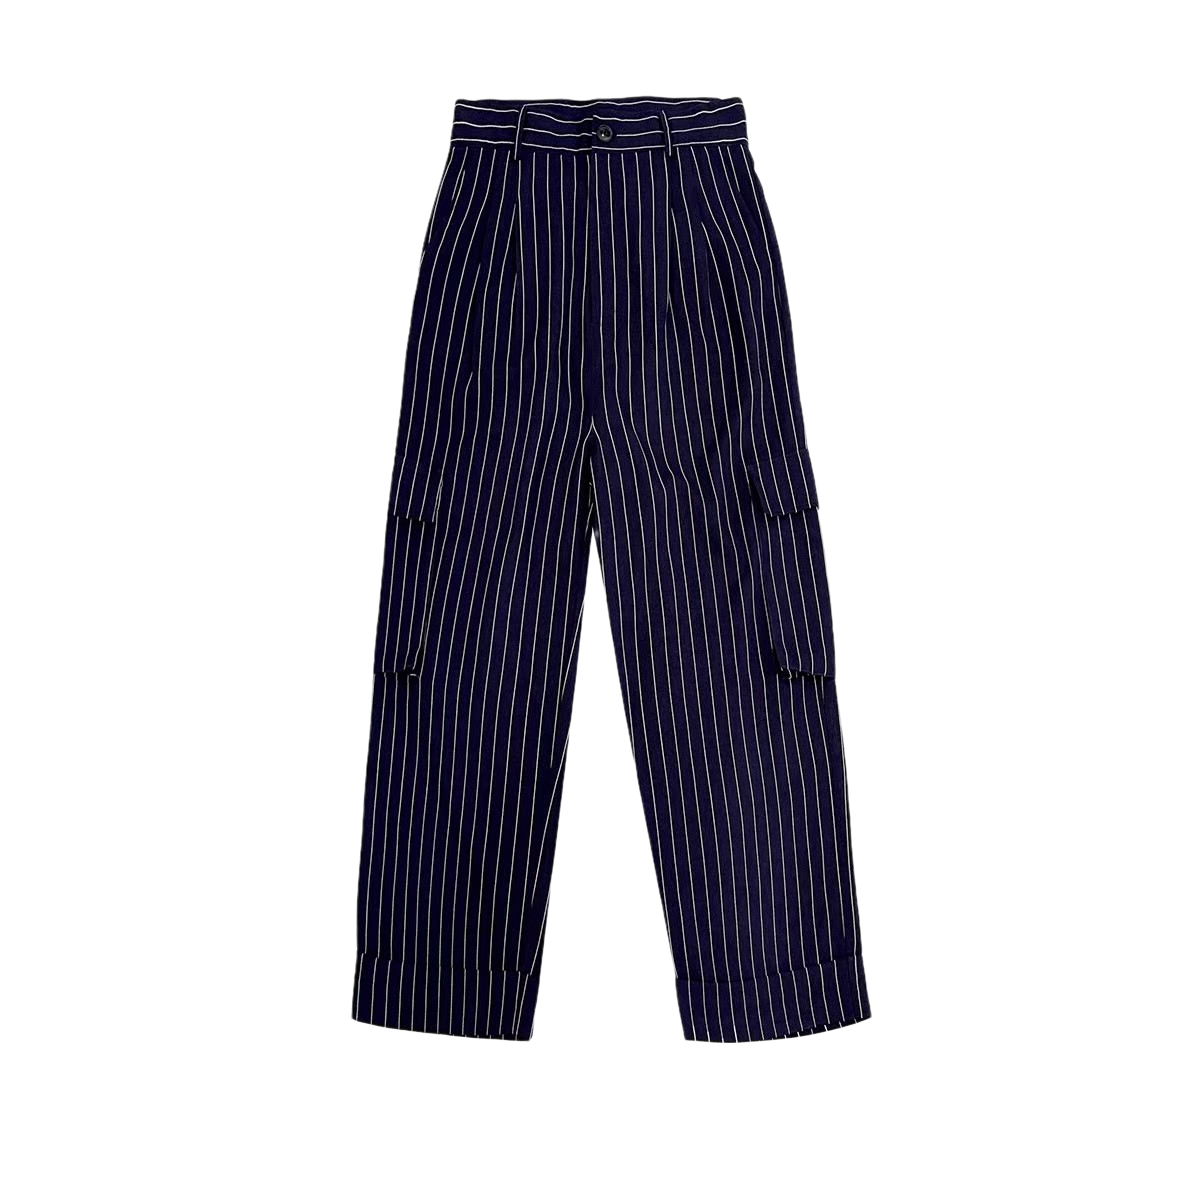 Casual Striped Pants (Blue Striped)